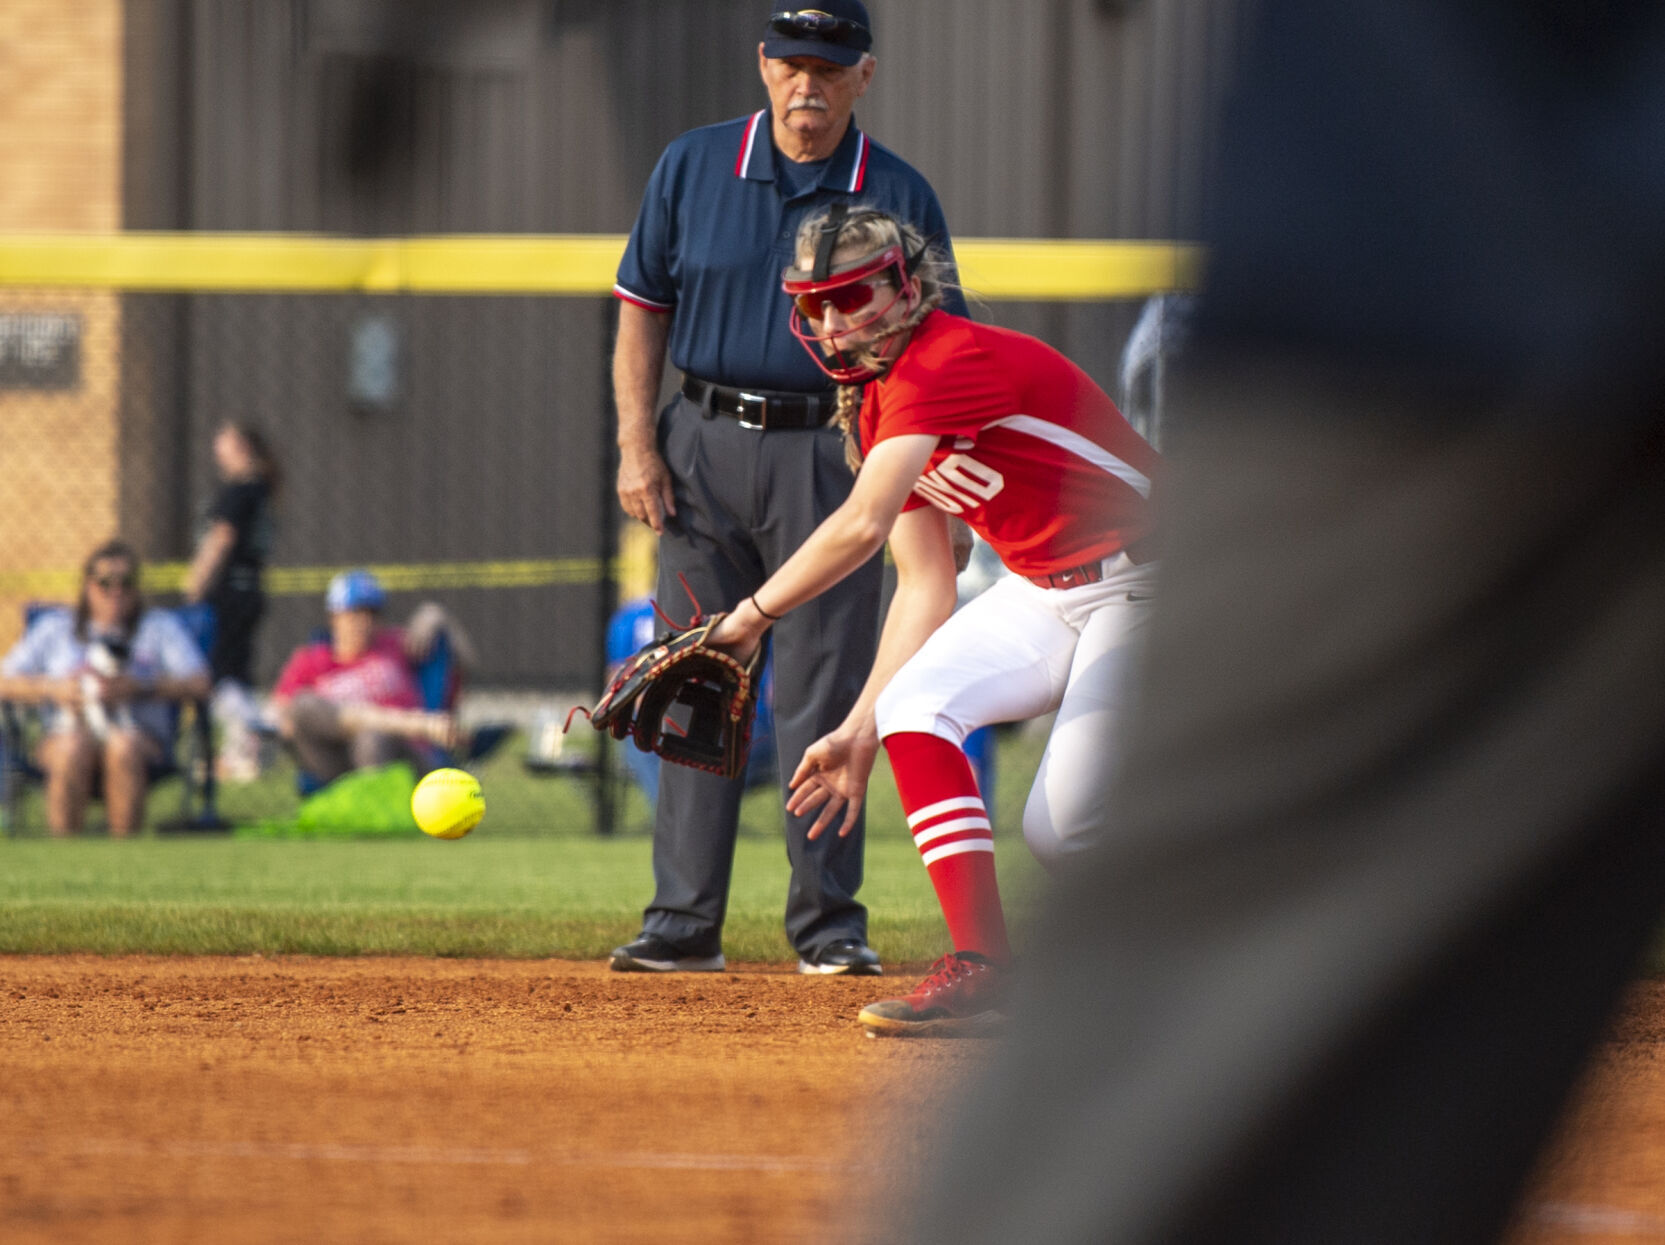 Tri-State Showcase: Ninth Edition Brings Top Softball Teams for Premier Competition